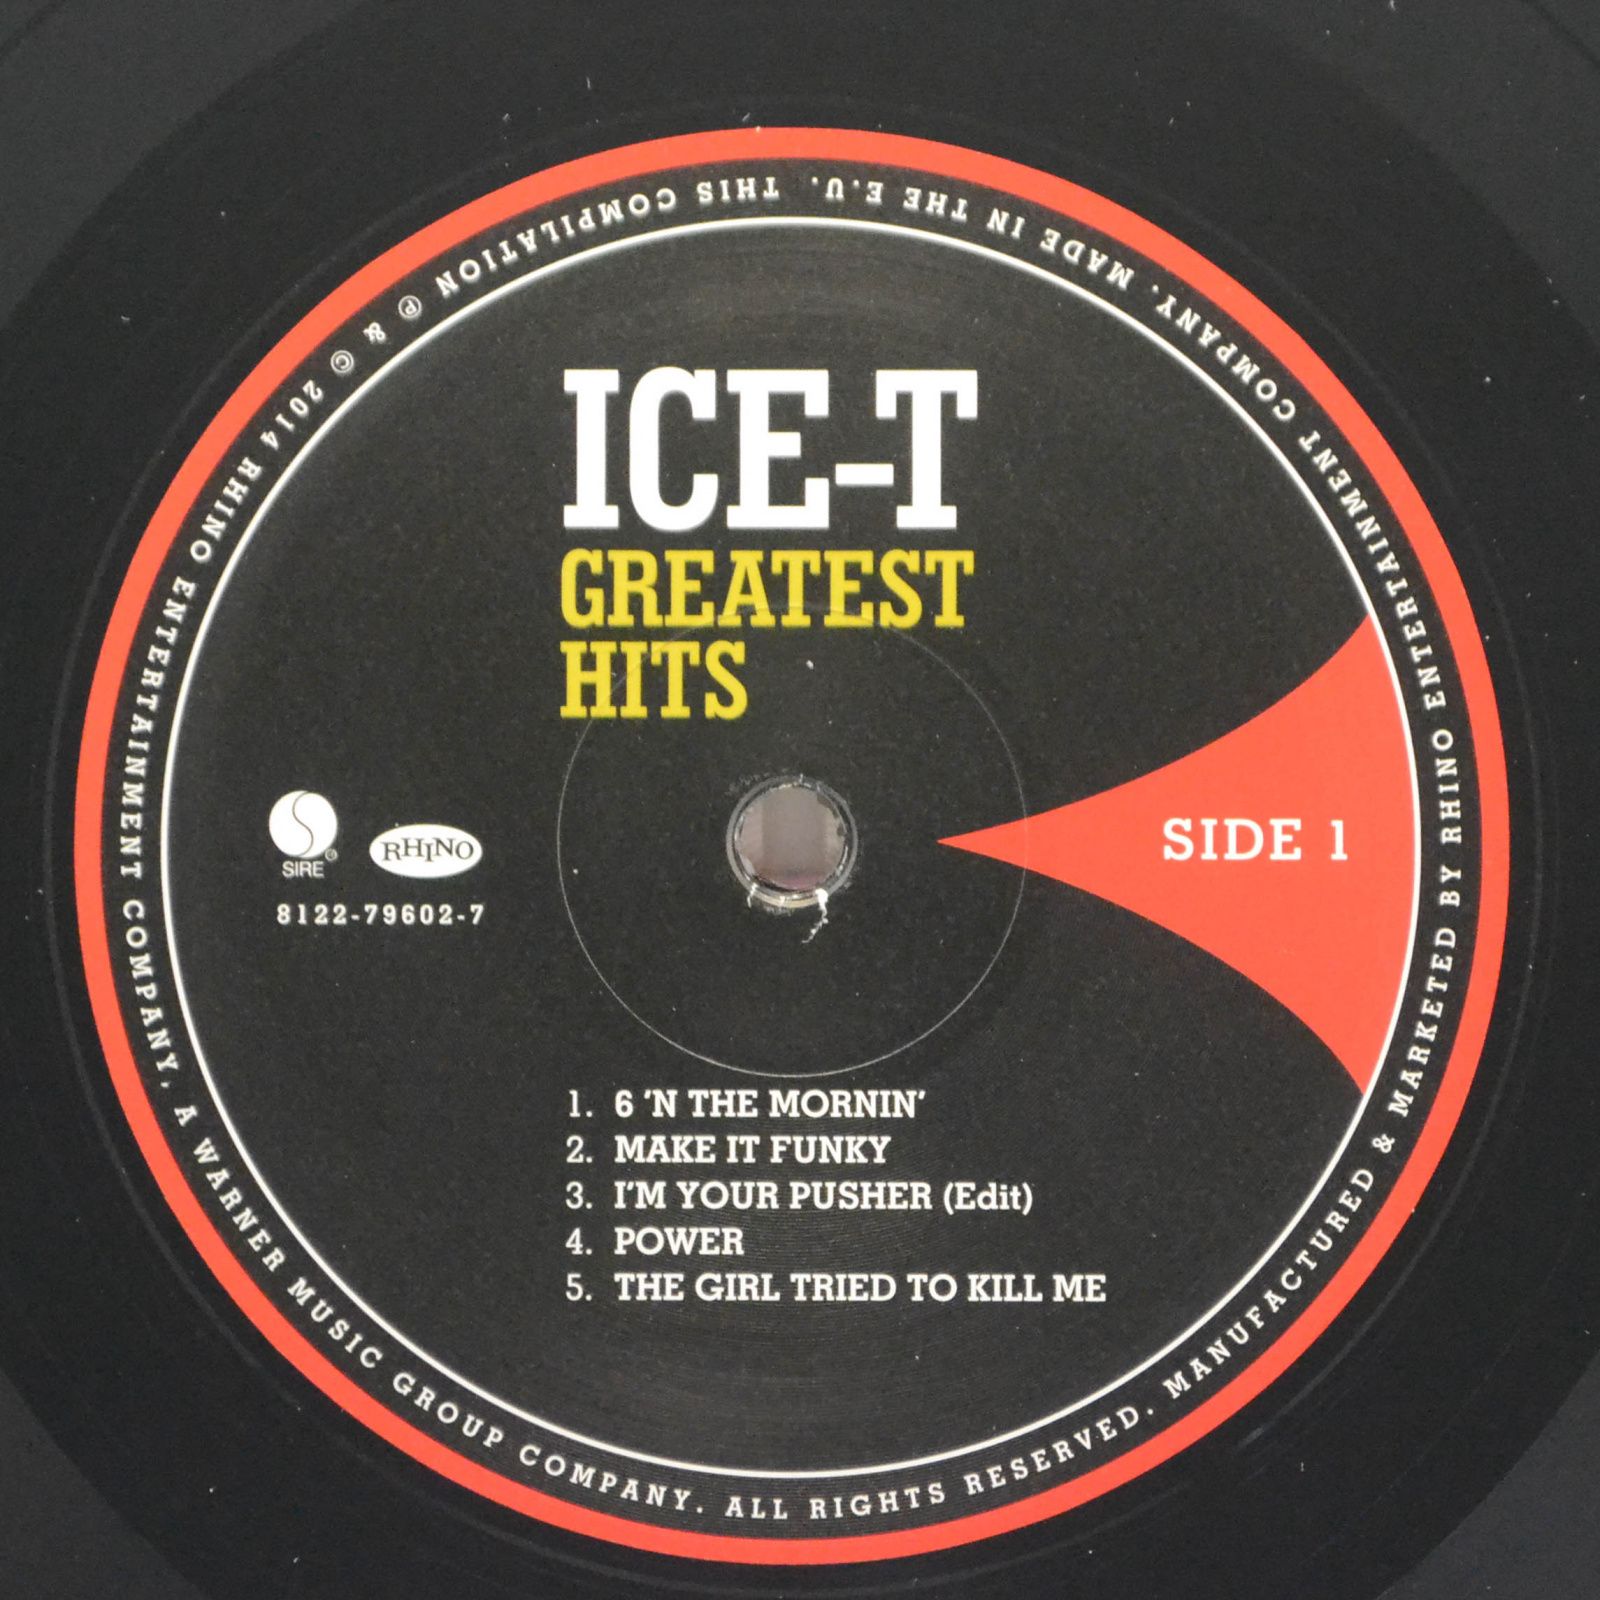 Ice-T — Greatest Hits, 2014